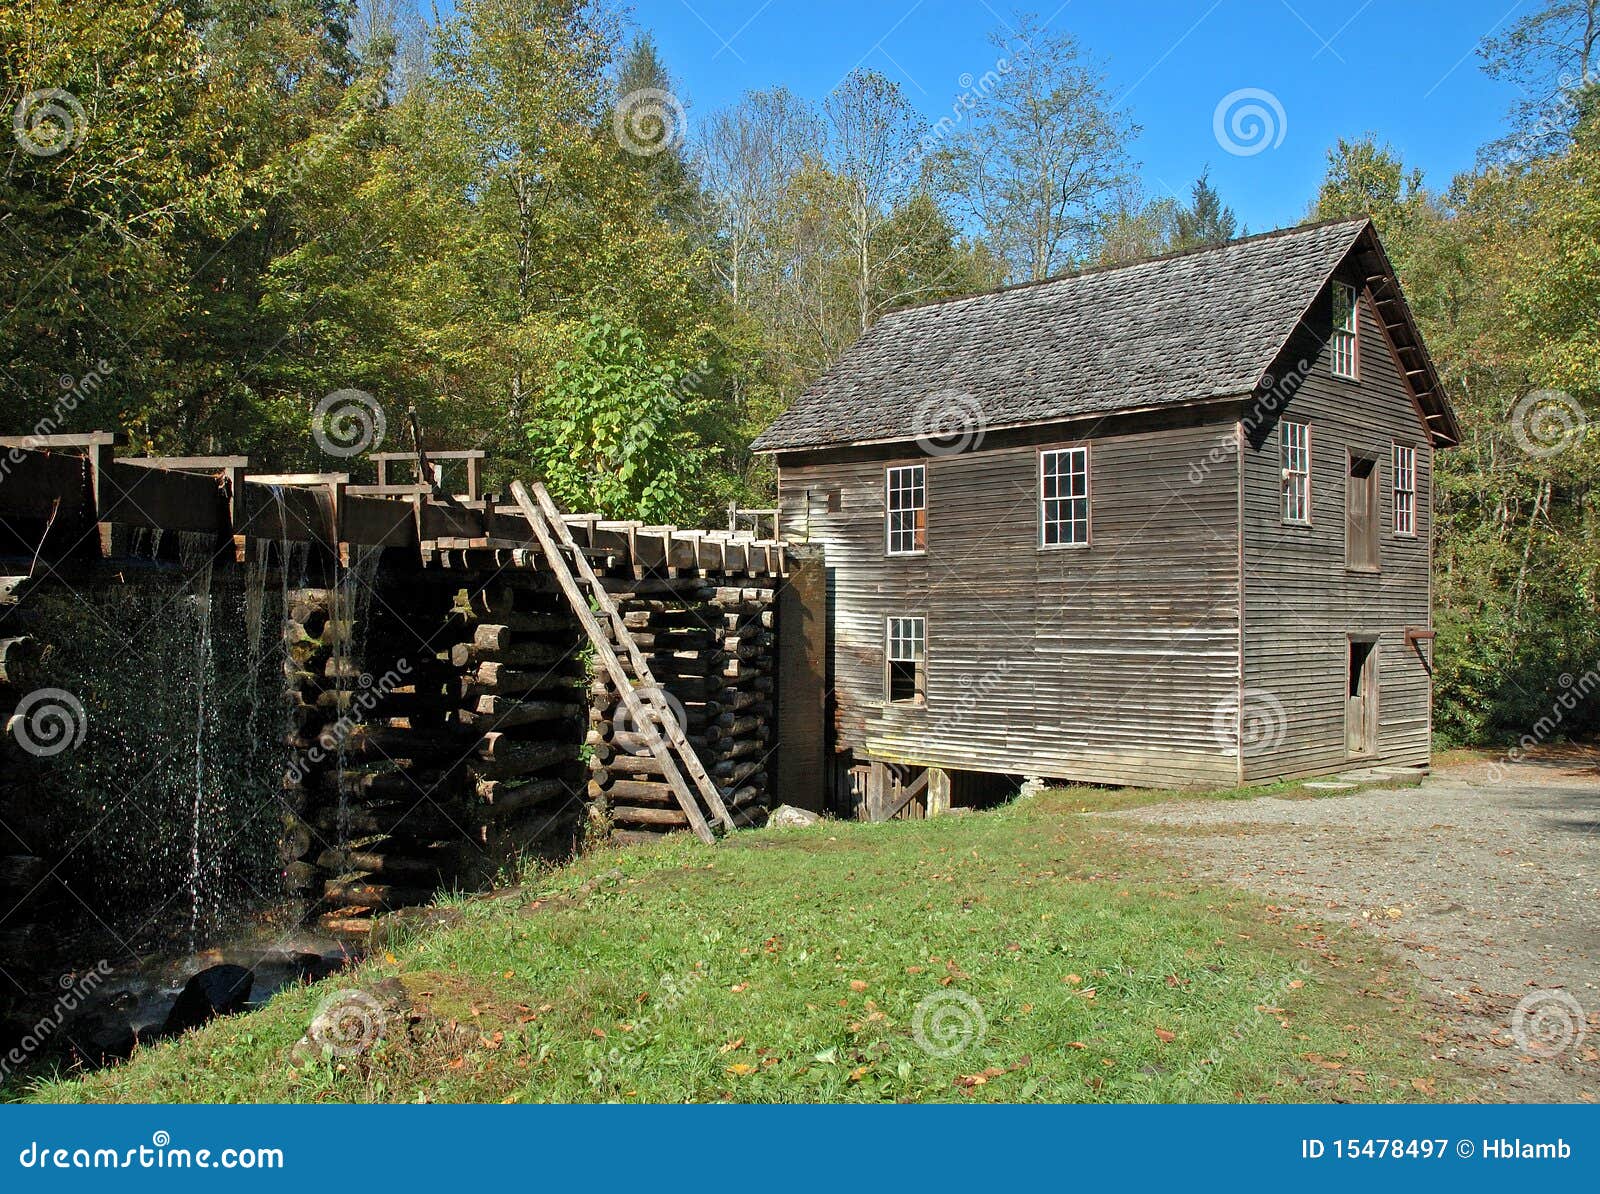 Vintage sawmill located in Cades Cove Area of the Smokey Mountains of 